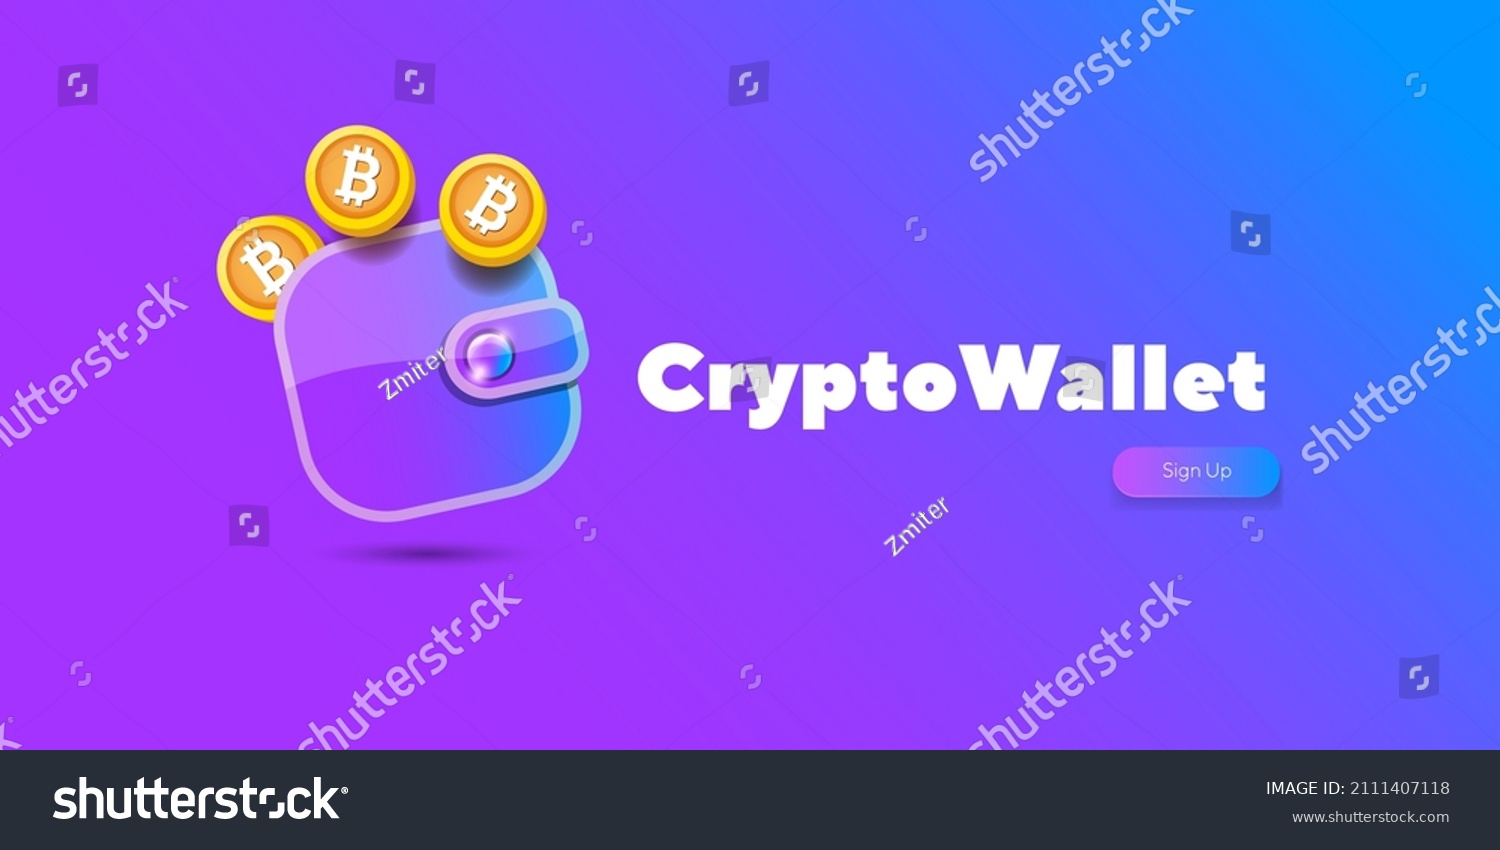 SVG of Cryptocurrency wallet concept illustration with wallet and crypto coins isolated on violet background. Crypto wallet landing page and poster design template. Crypto wallet for bitcon, solana, ethereum svg